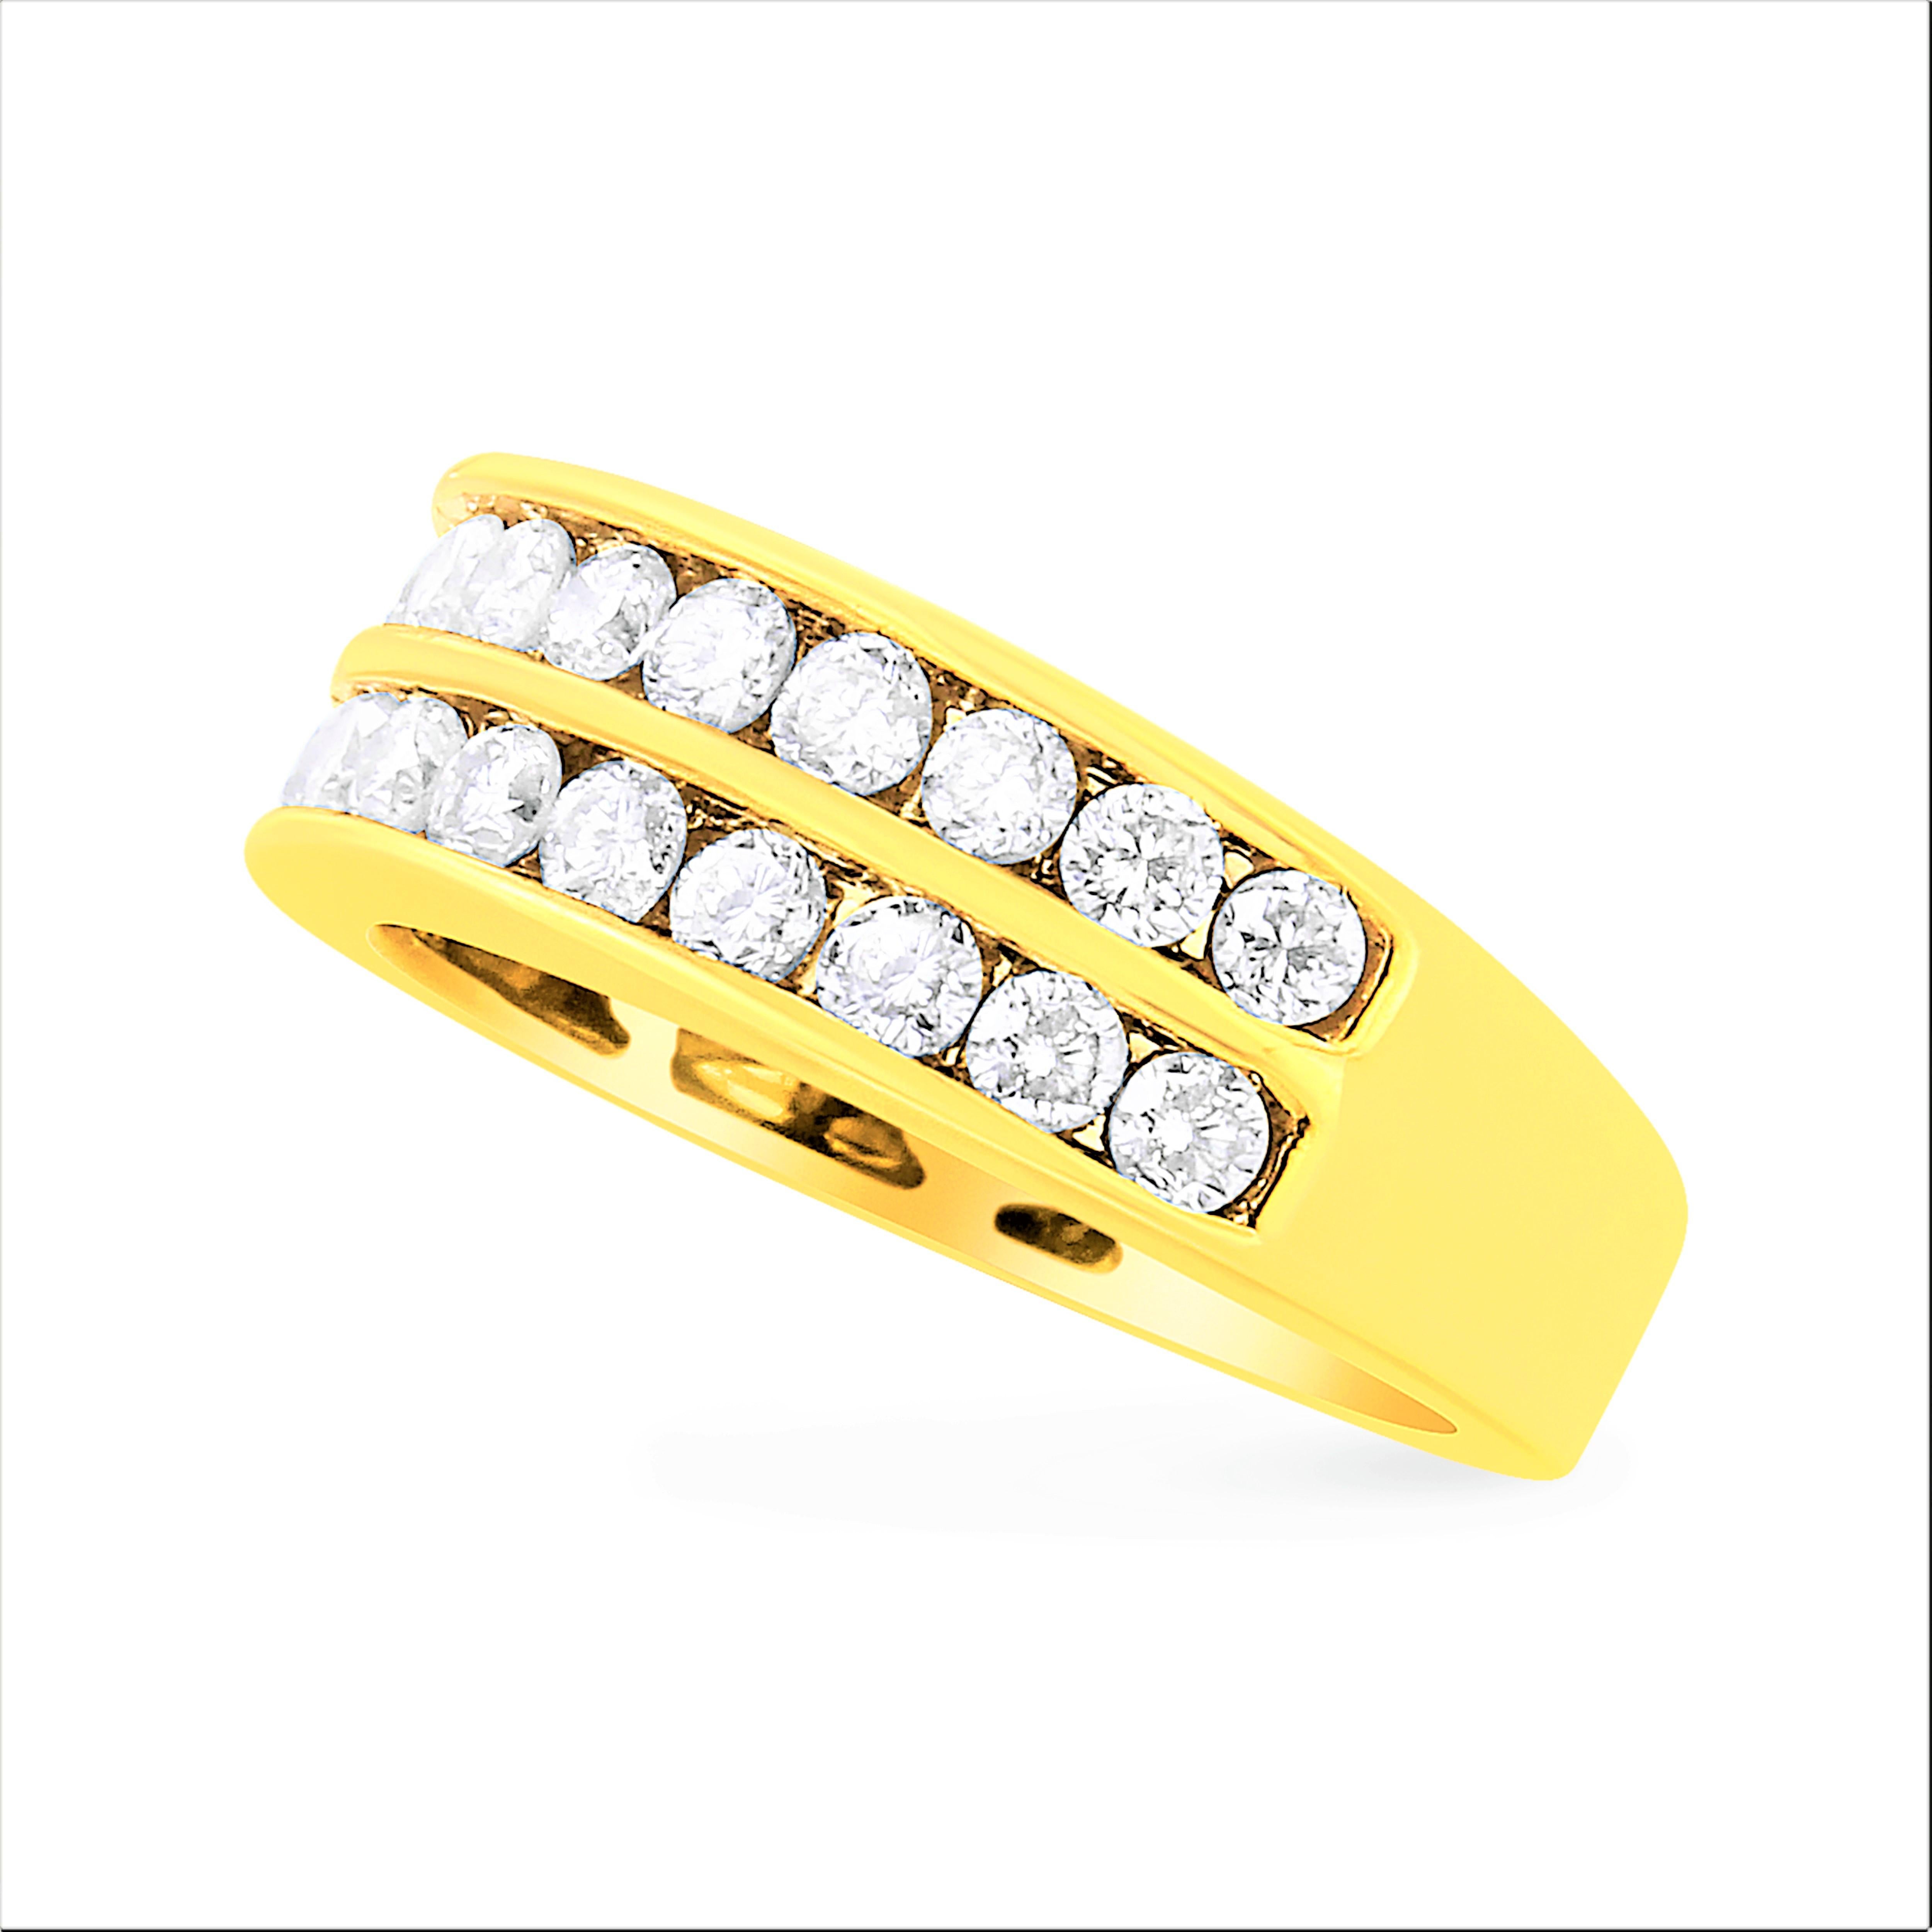 A double row of glittering round cut diamonds adorn this gorgeous ring design. Crafted in polished warm 10k yellow gold, this band ring showcases 22 natural, sparkling diamonds channel set in two rows. A modern take on a classic design, this band is